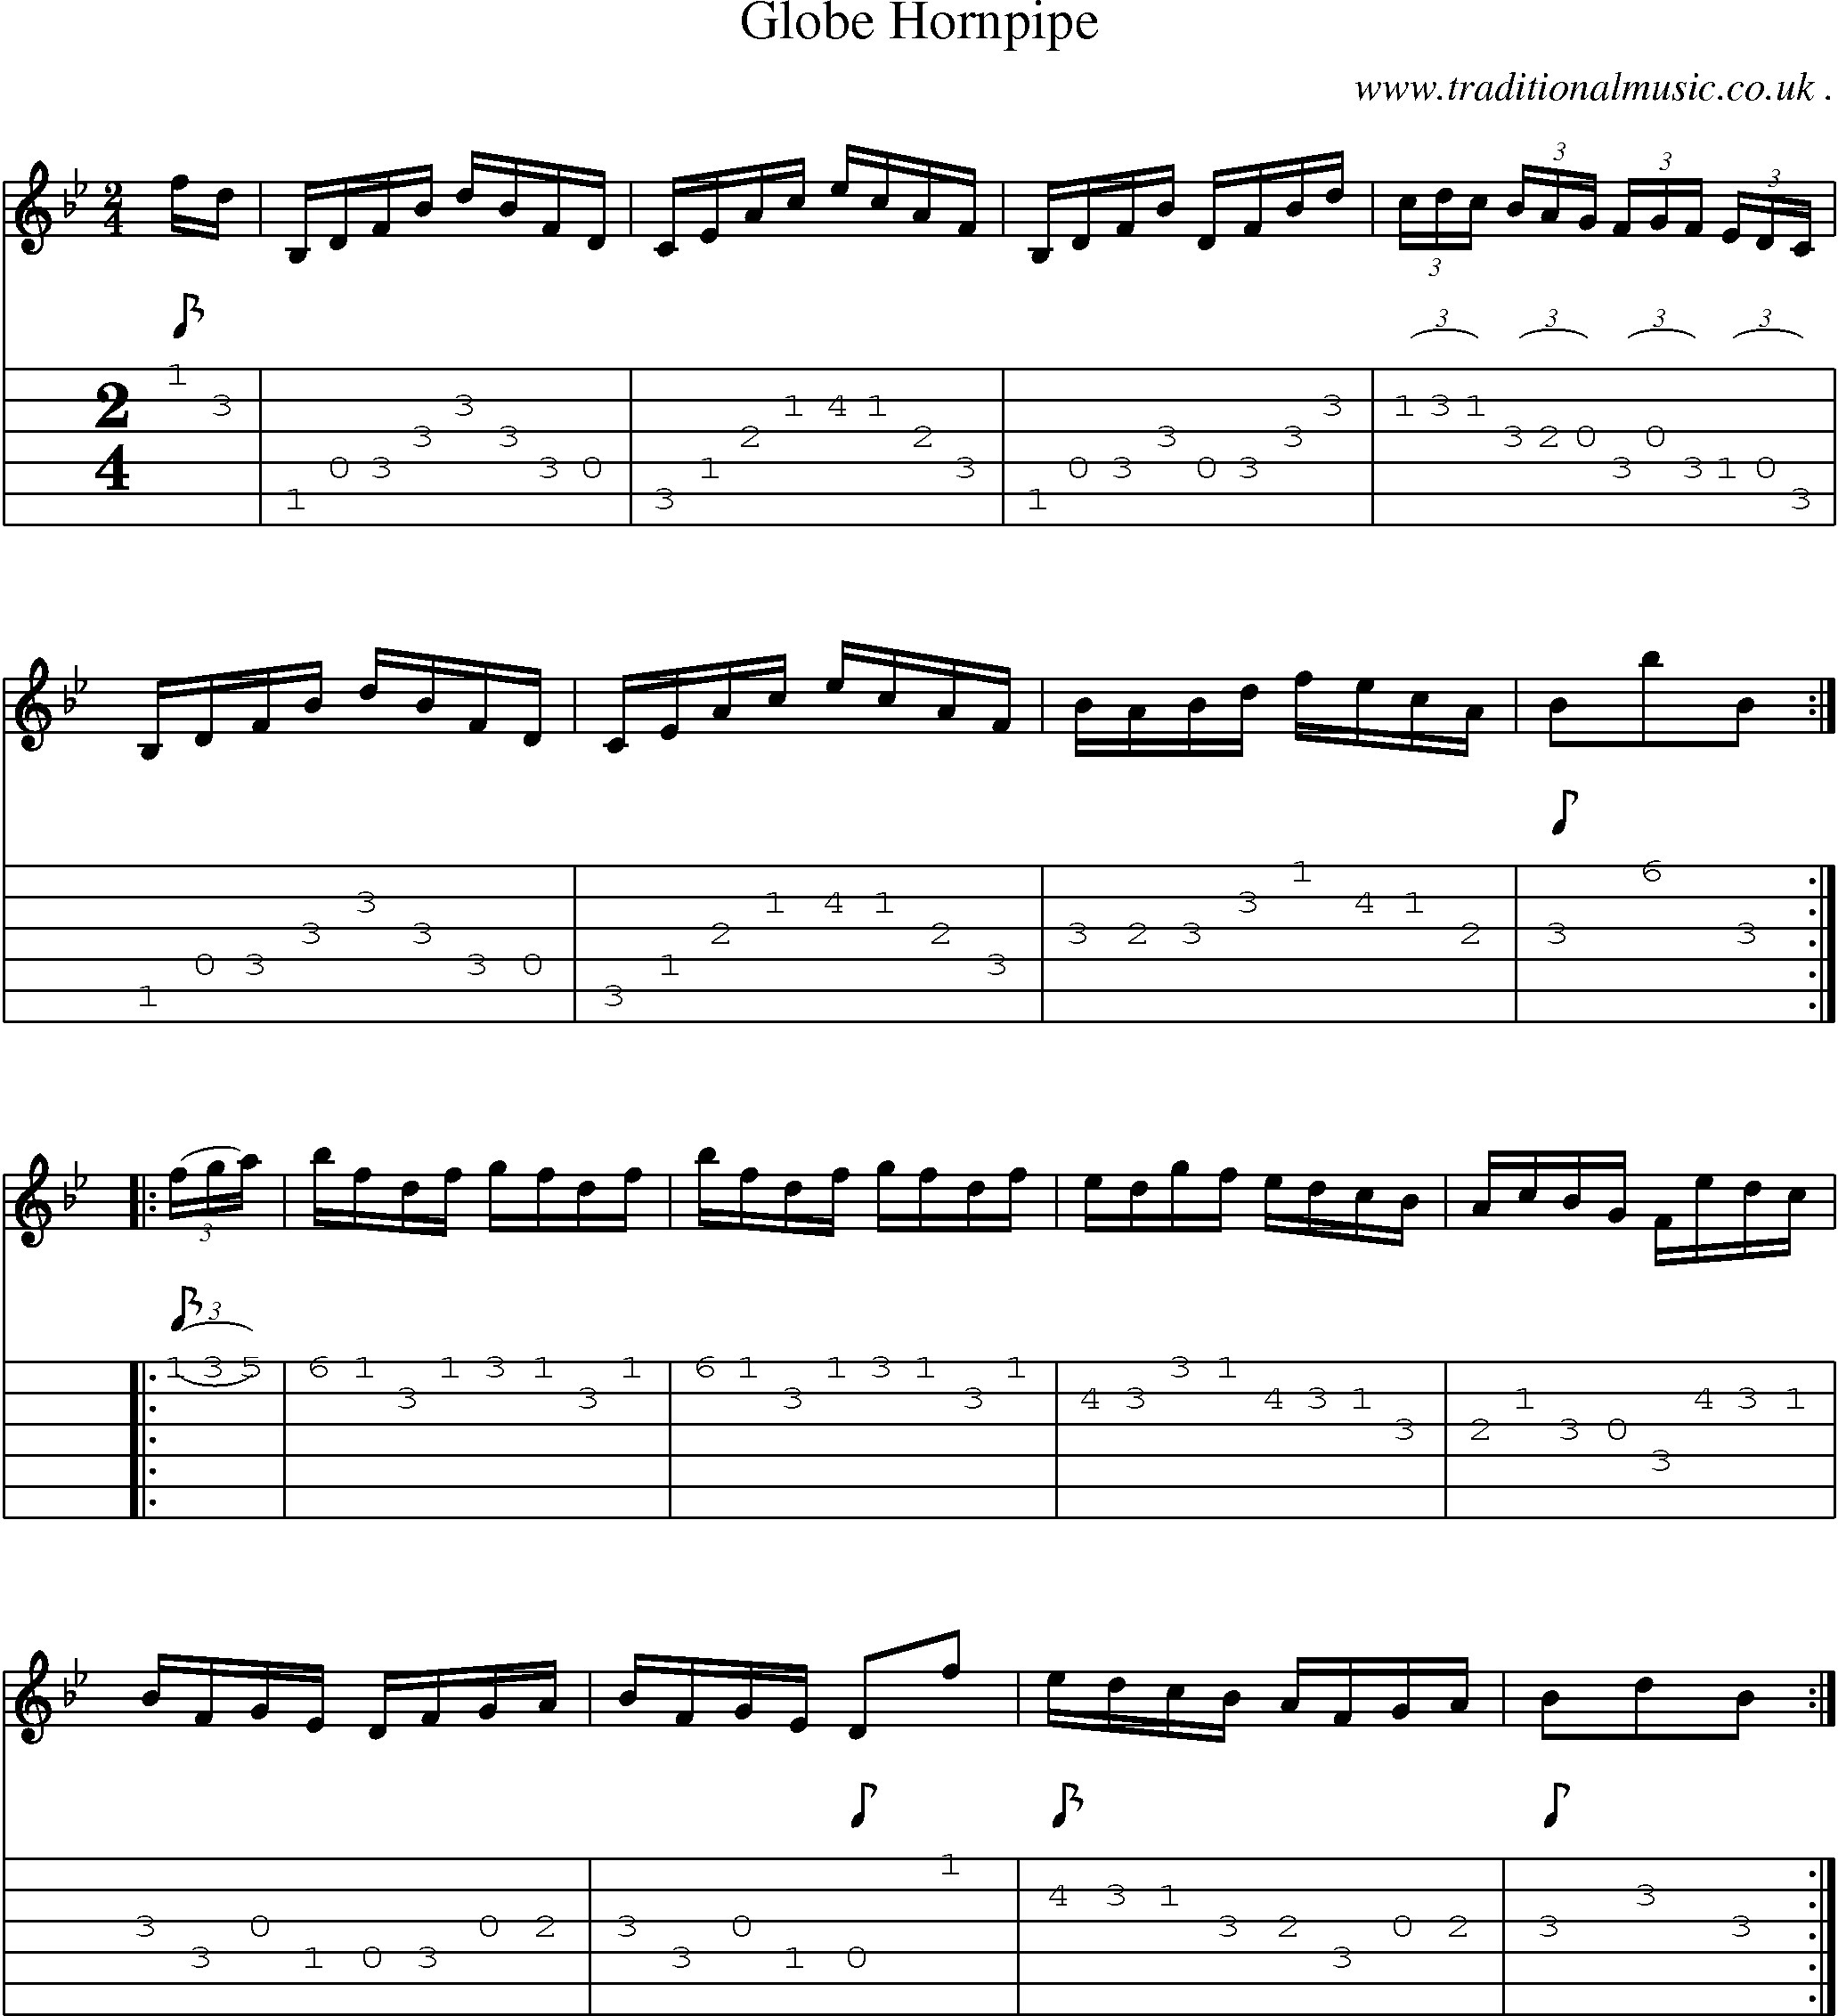 Sheet-Music and Guitar Tabs for Globe Hornpipe